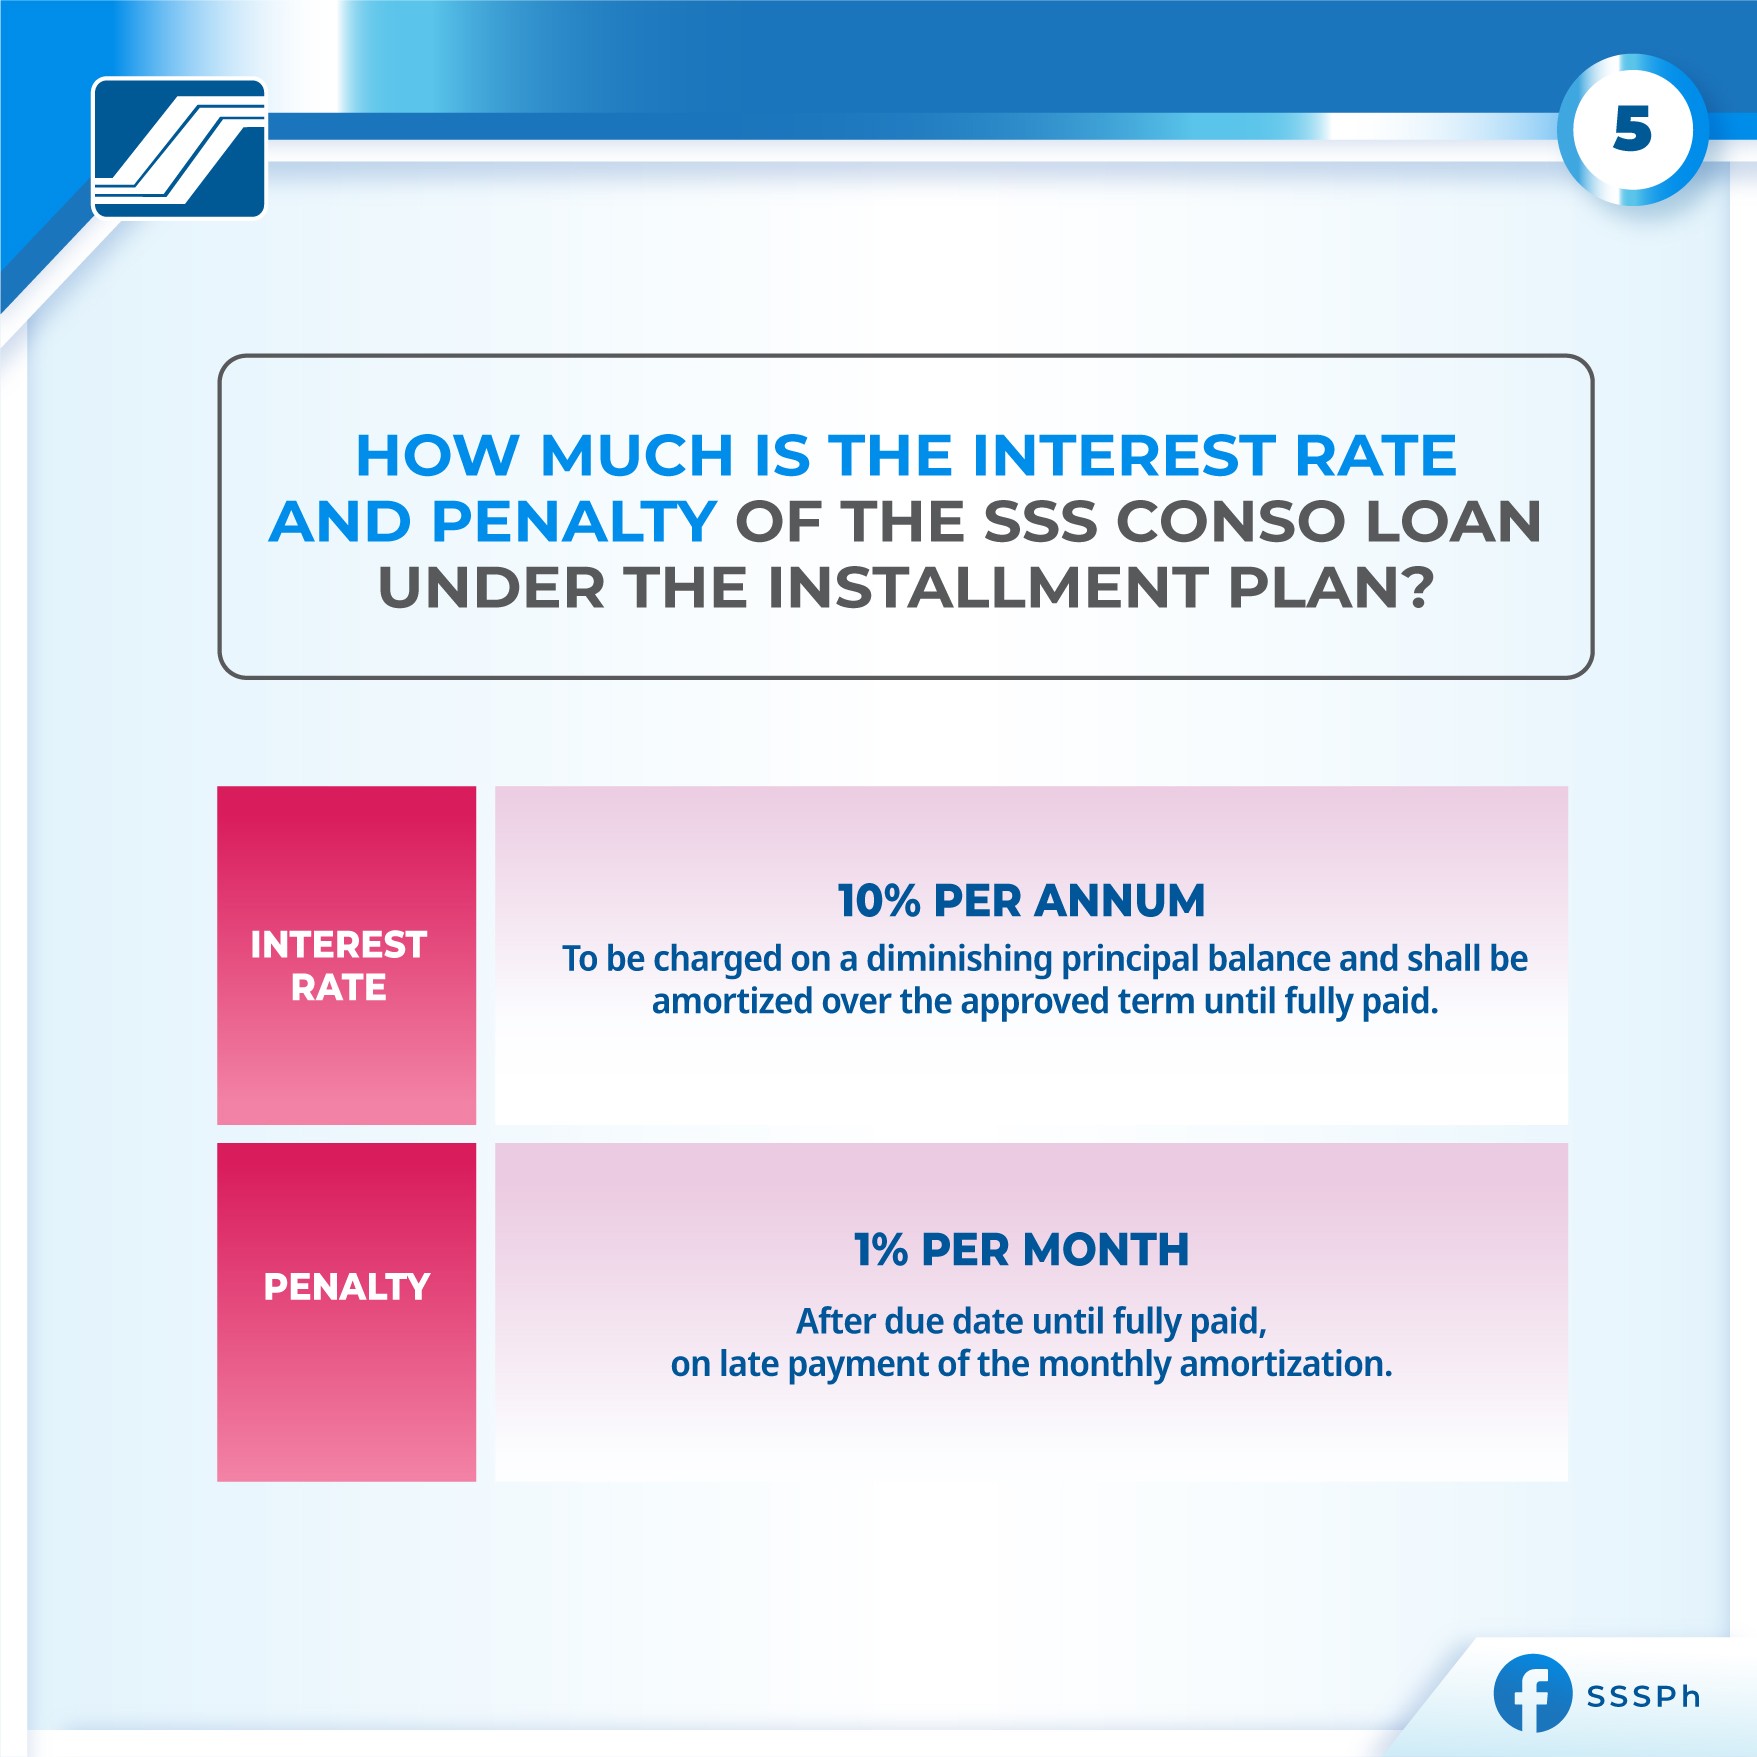 sss loan restructuring program - interest rate and late payment penalty